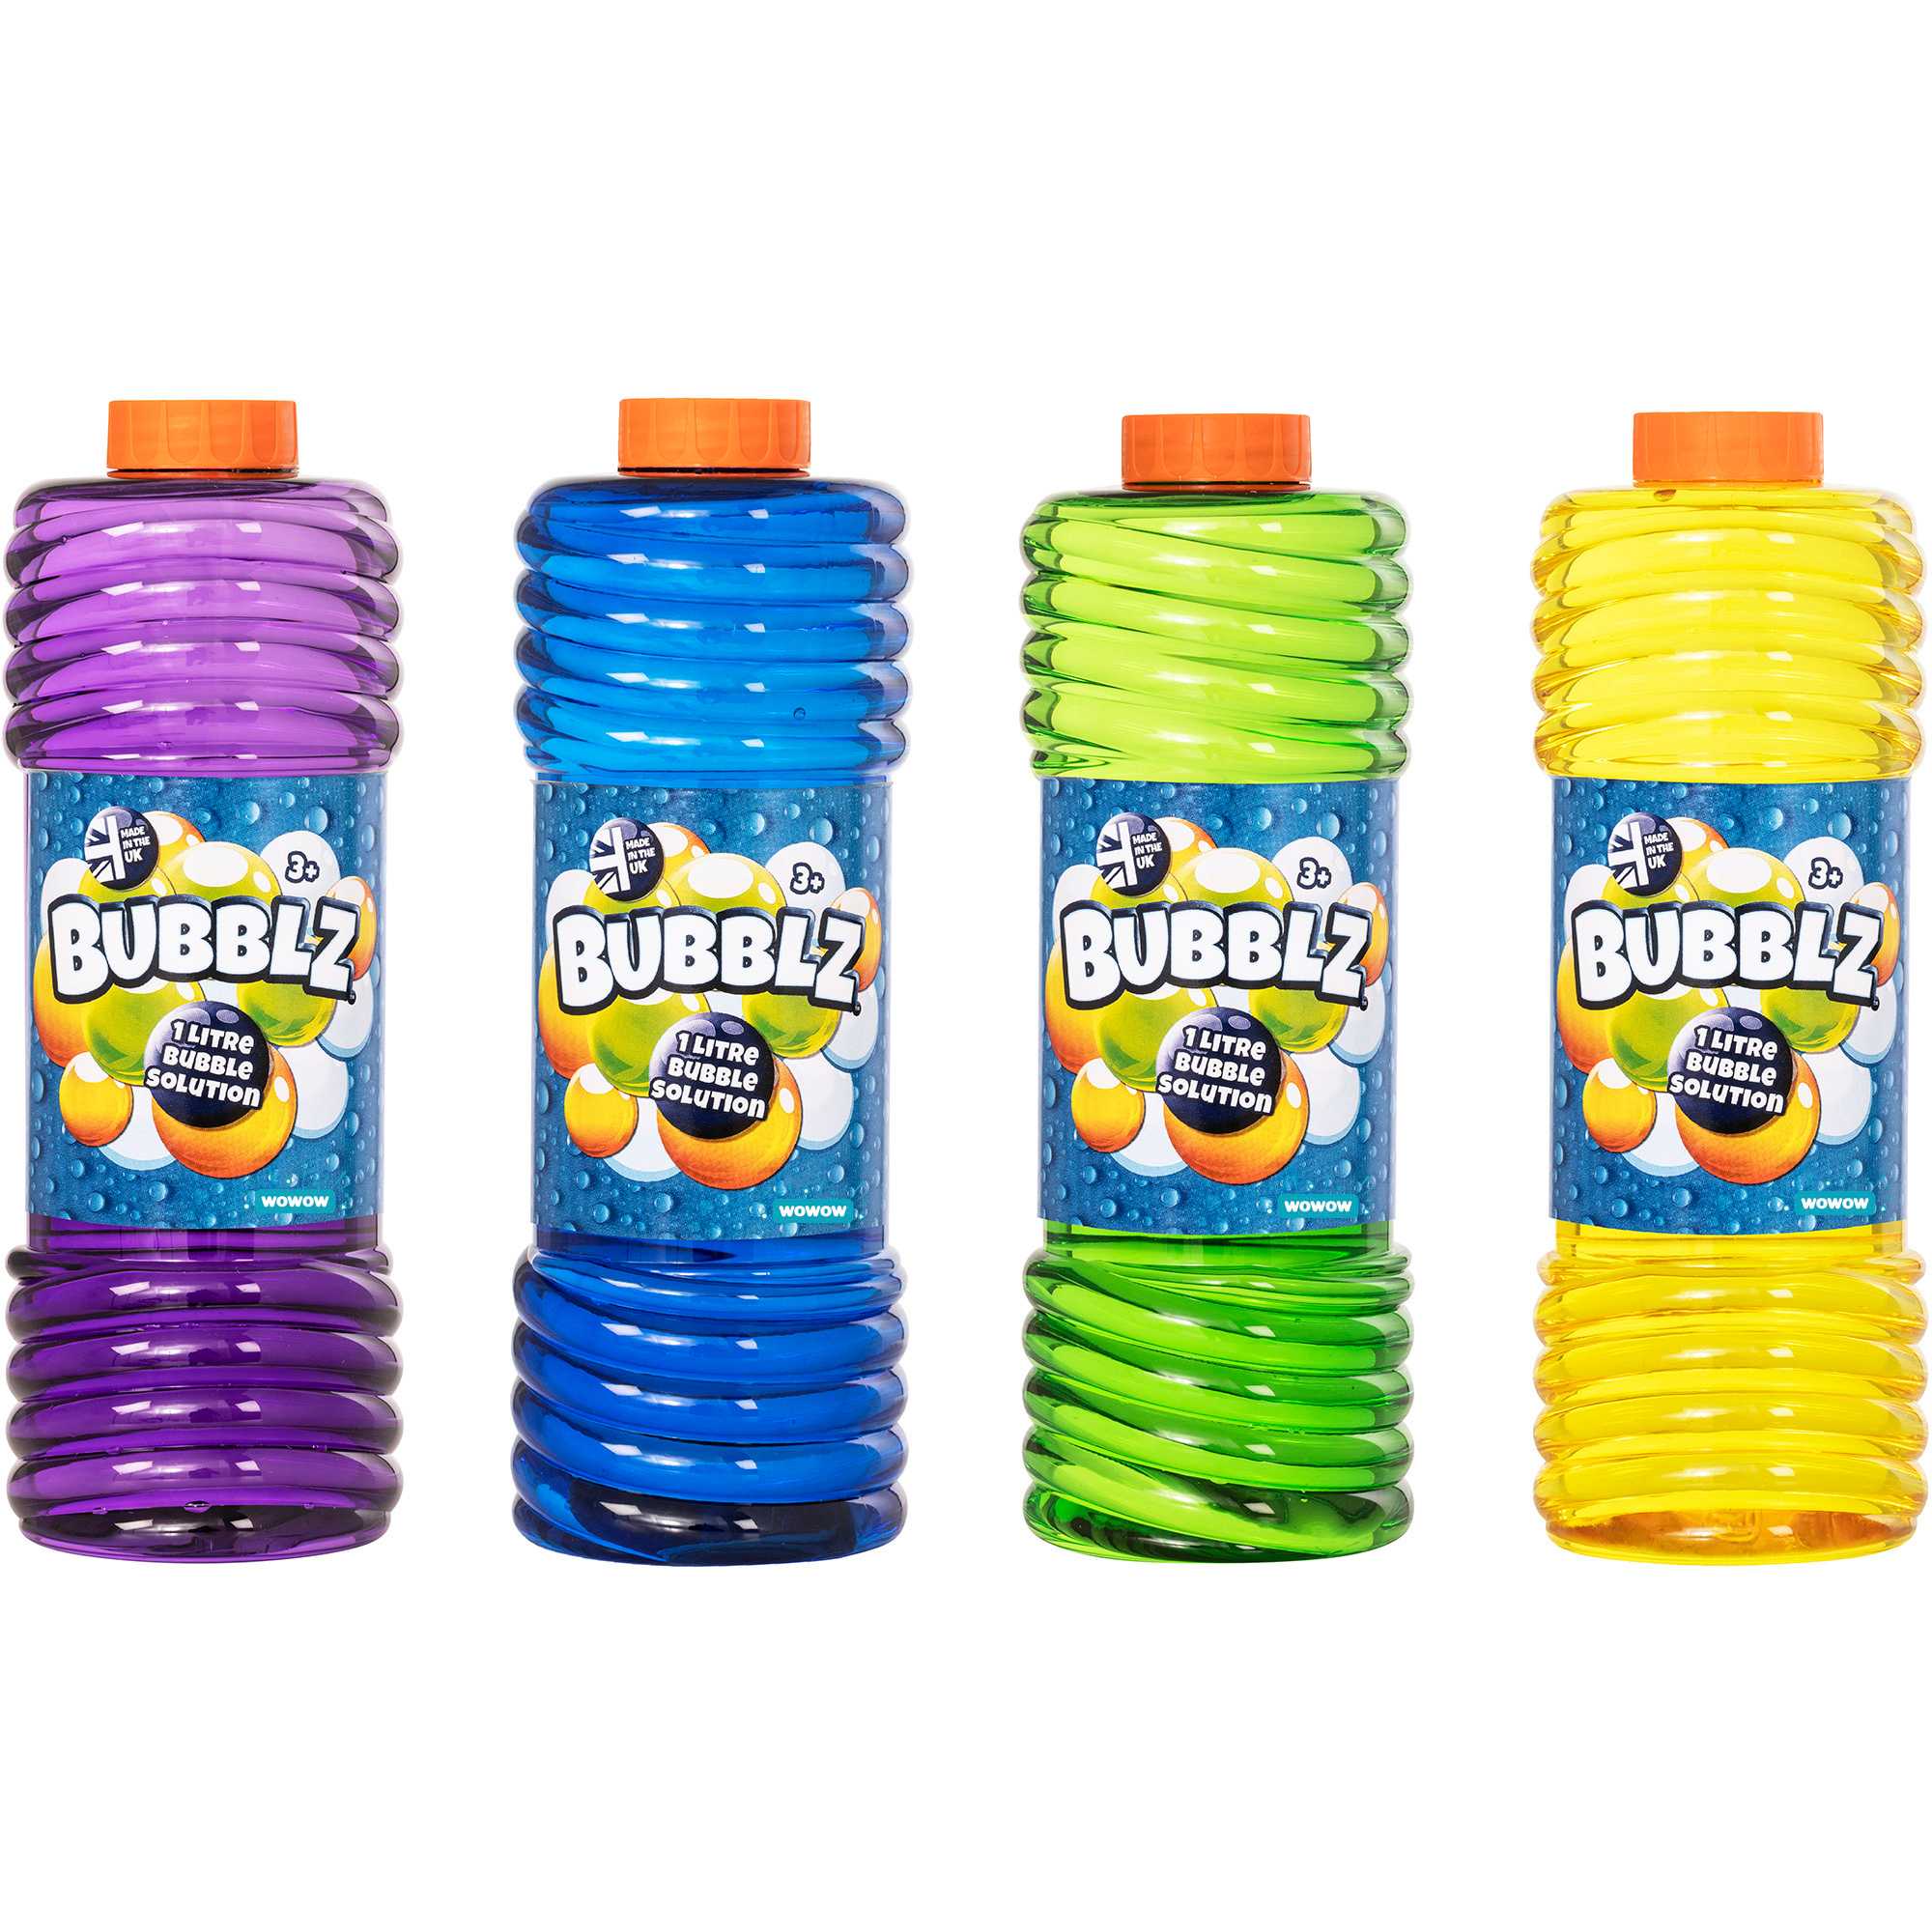 Bubblz Bubble Solution Made From 100% Recycled Plastic | 1 Litre Bottle